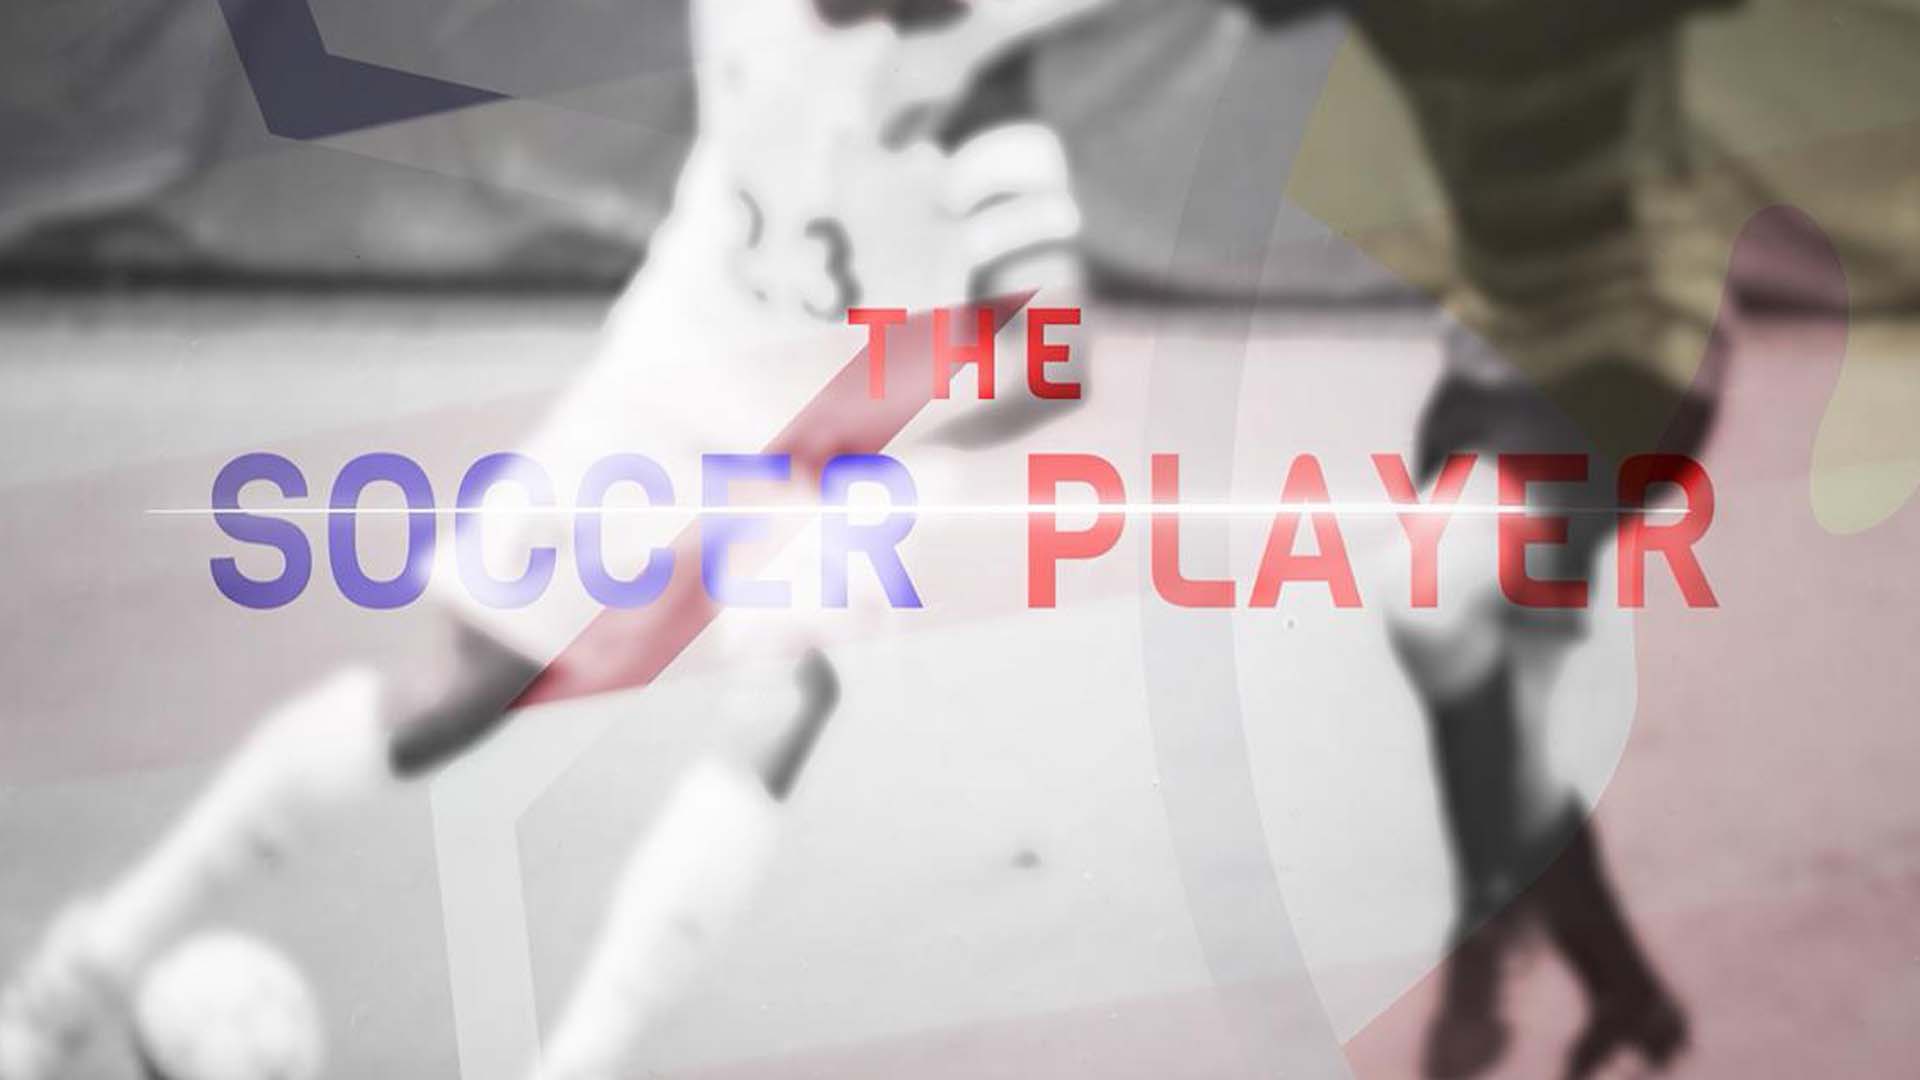 The Soccer Player